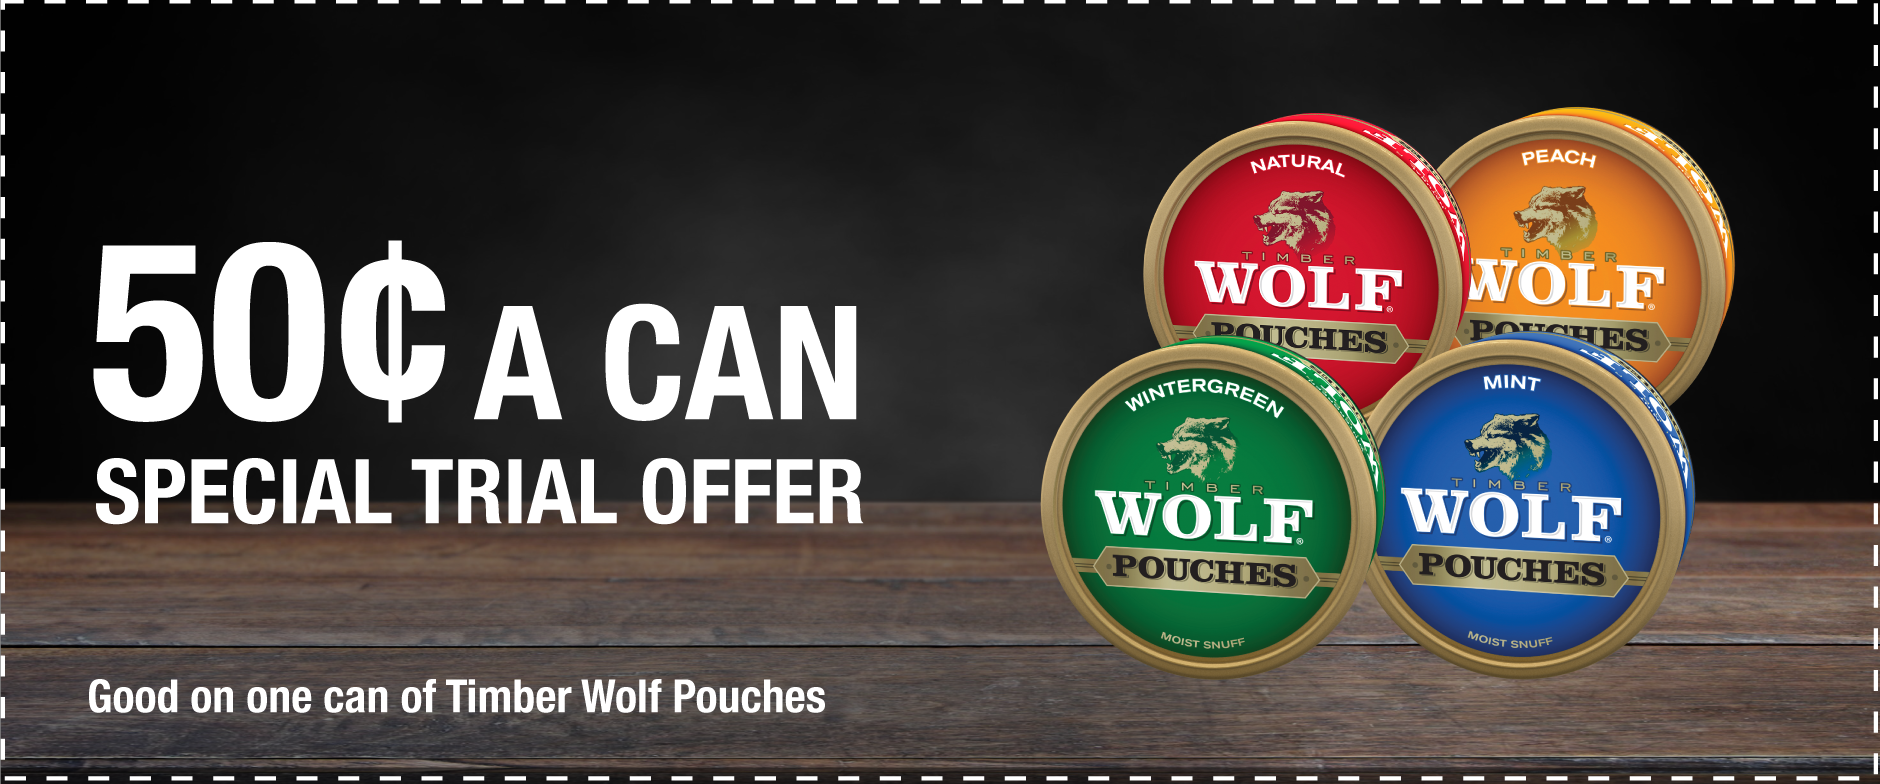 A coupon offer to try a can of Timber Wolf moist snuff pouches for fifty cents. On the left of the coupon is an arrangement of cans of Timber Wolf pouches.